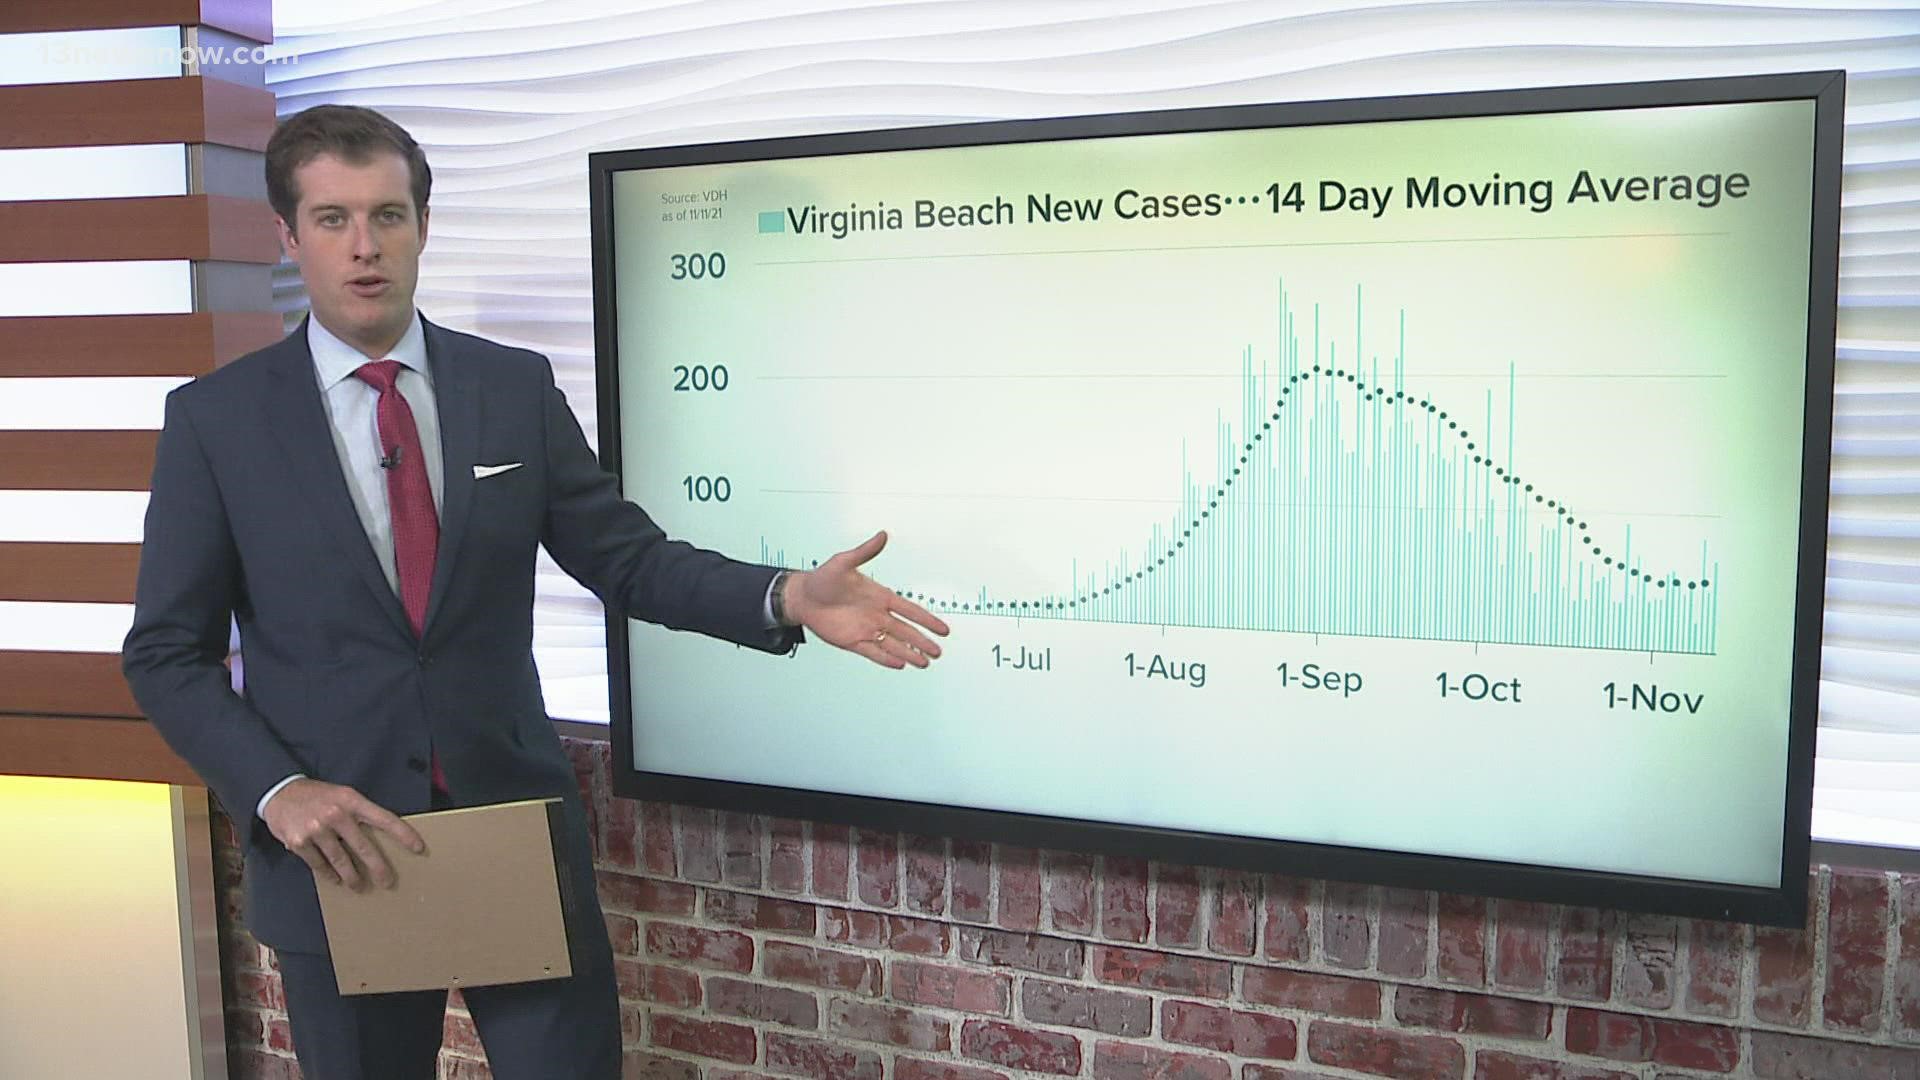 13News Now anchor Dan Kennedy breaks down data from the Virginia Department of Health to analyze coronavirus case trends in Virginia.